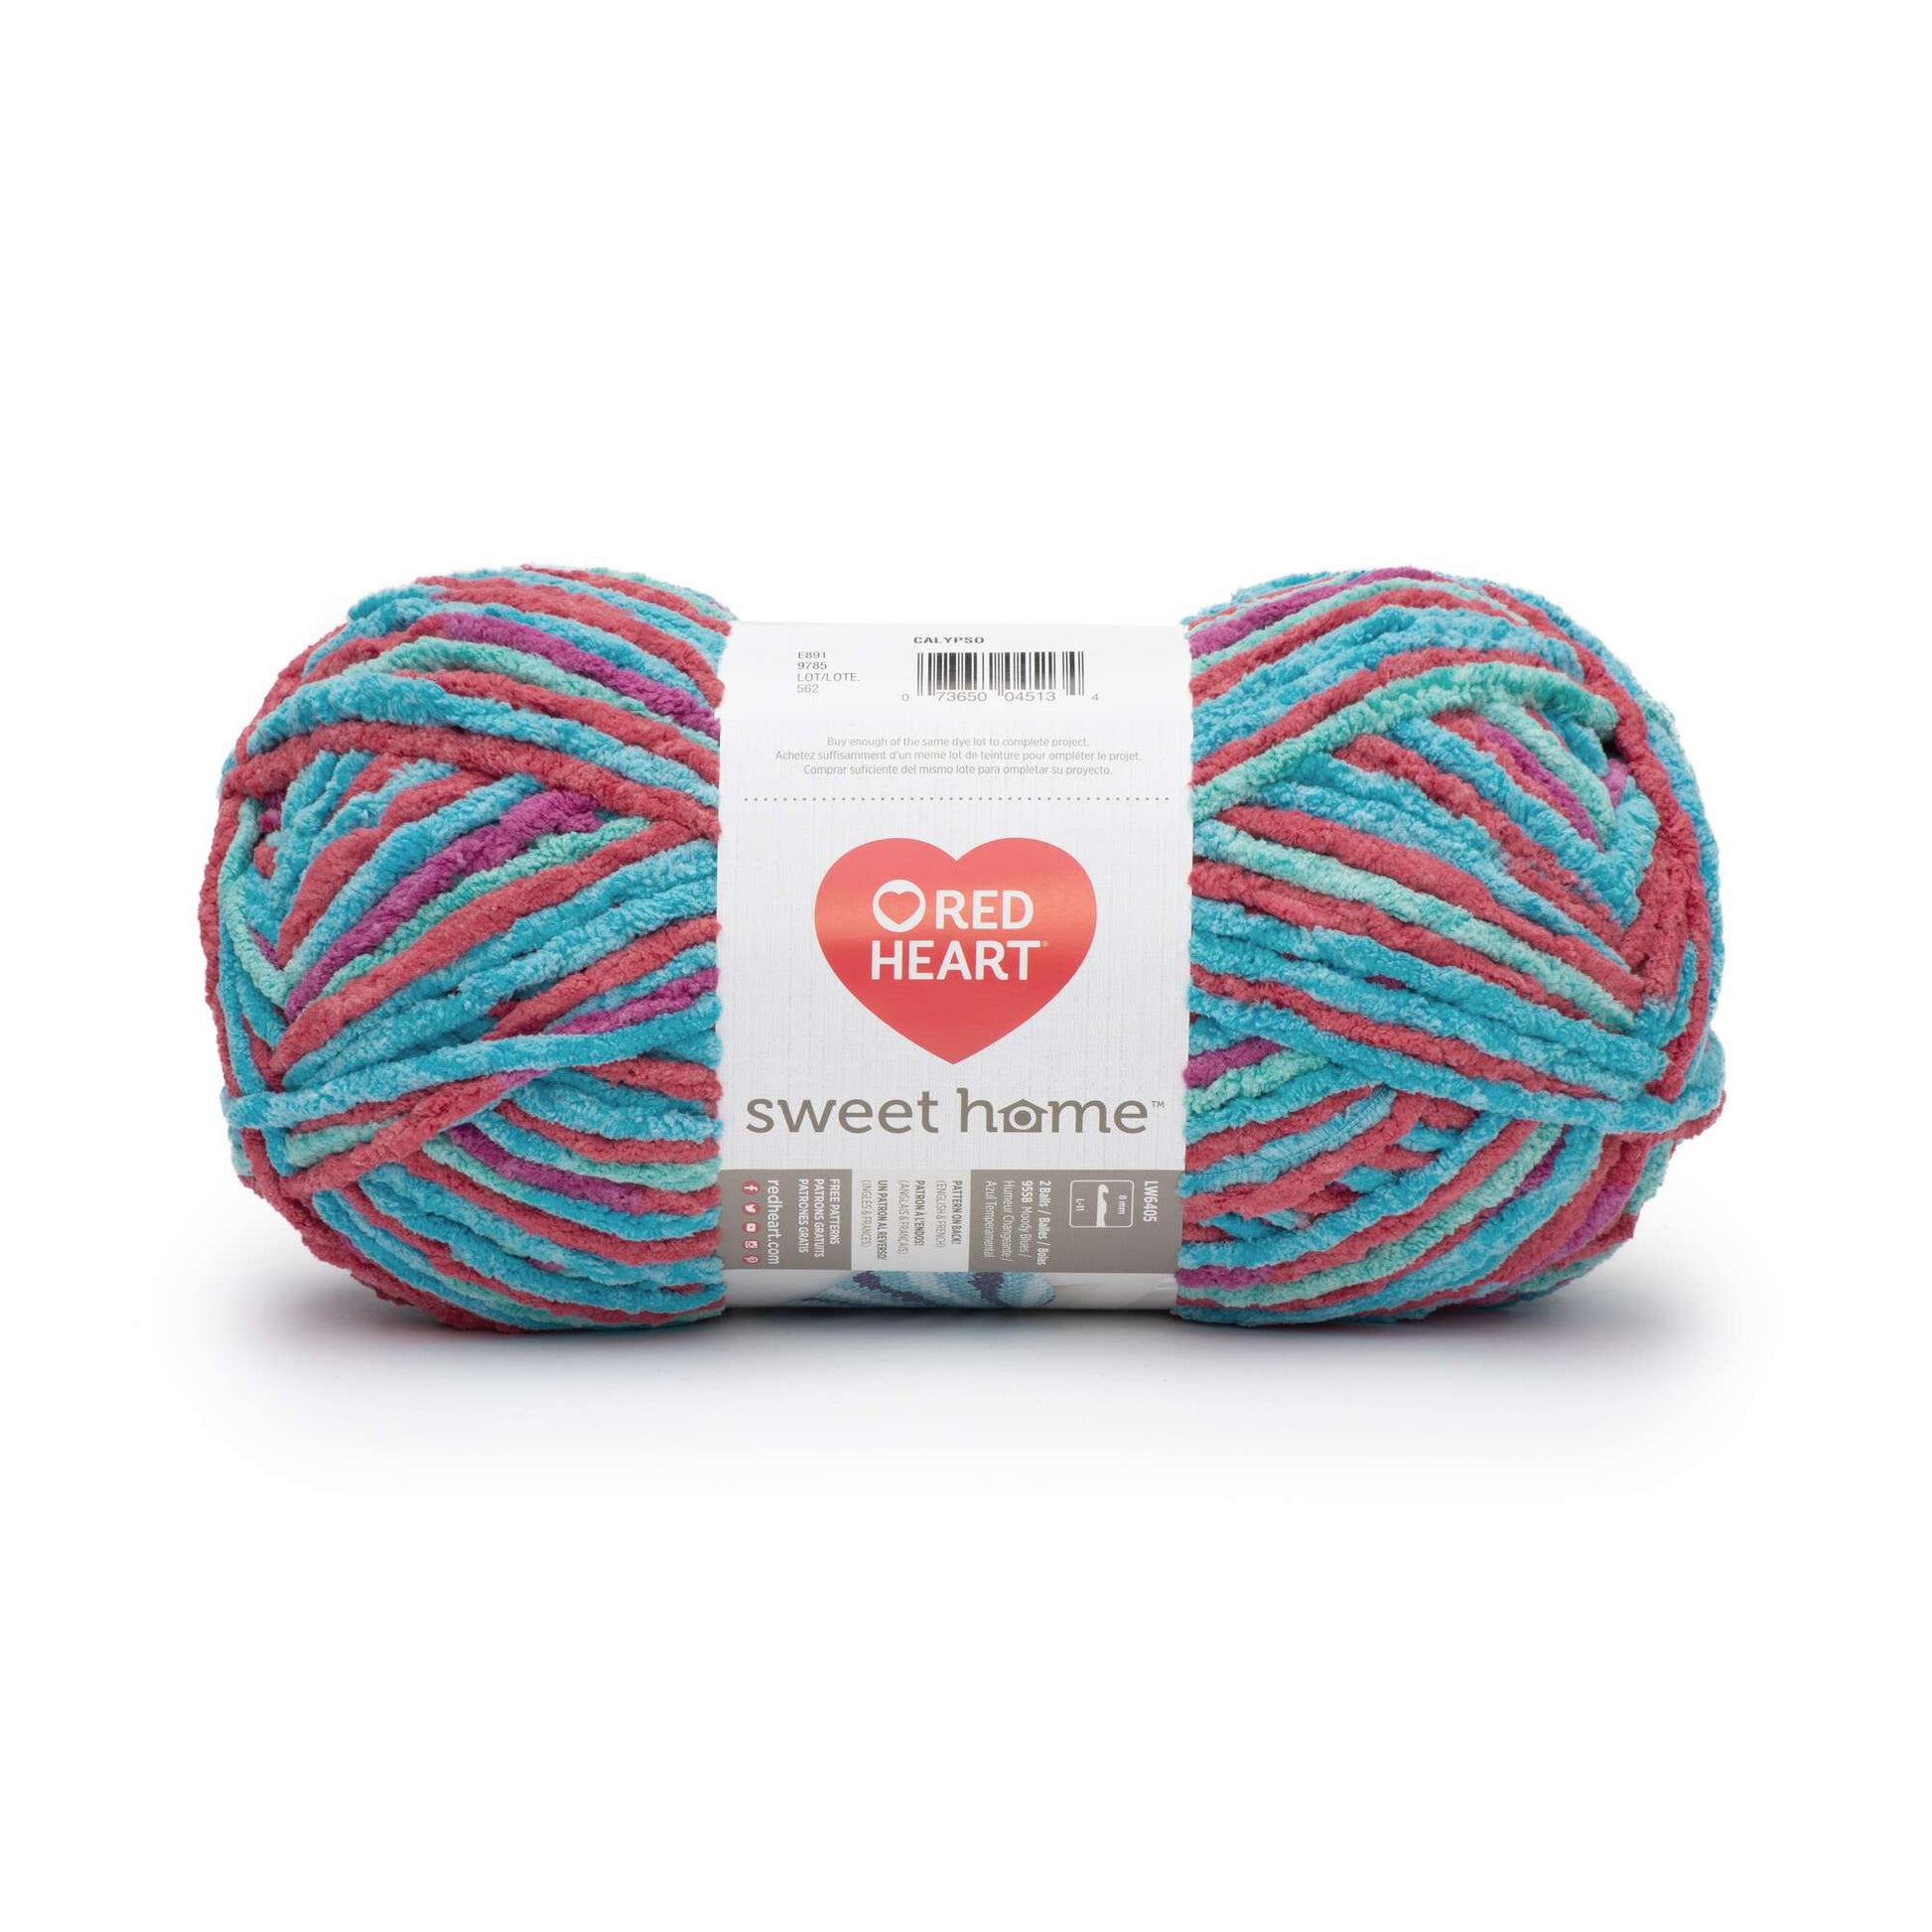 Red Heart Sweet Home Yarn - Clearance shades Red Heart Sweet Home Yarn - Clearance shades